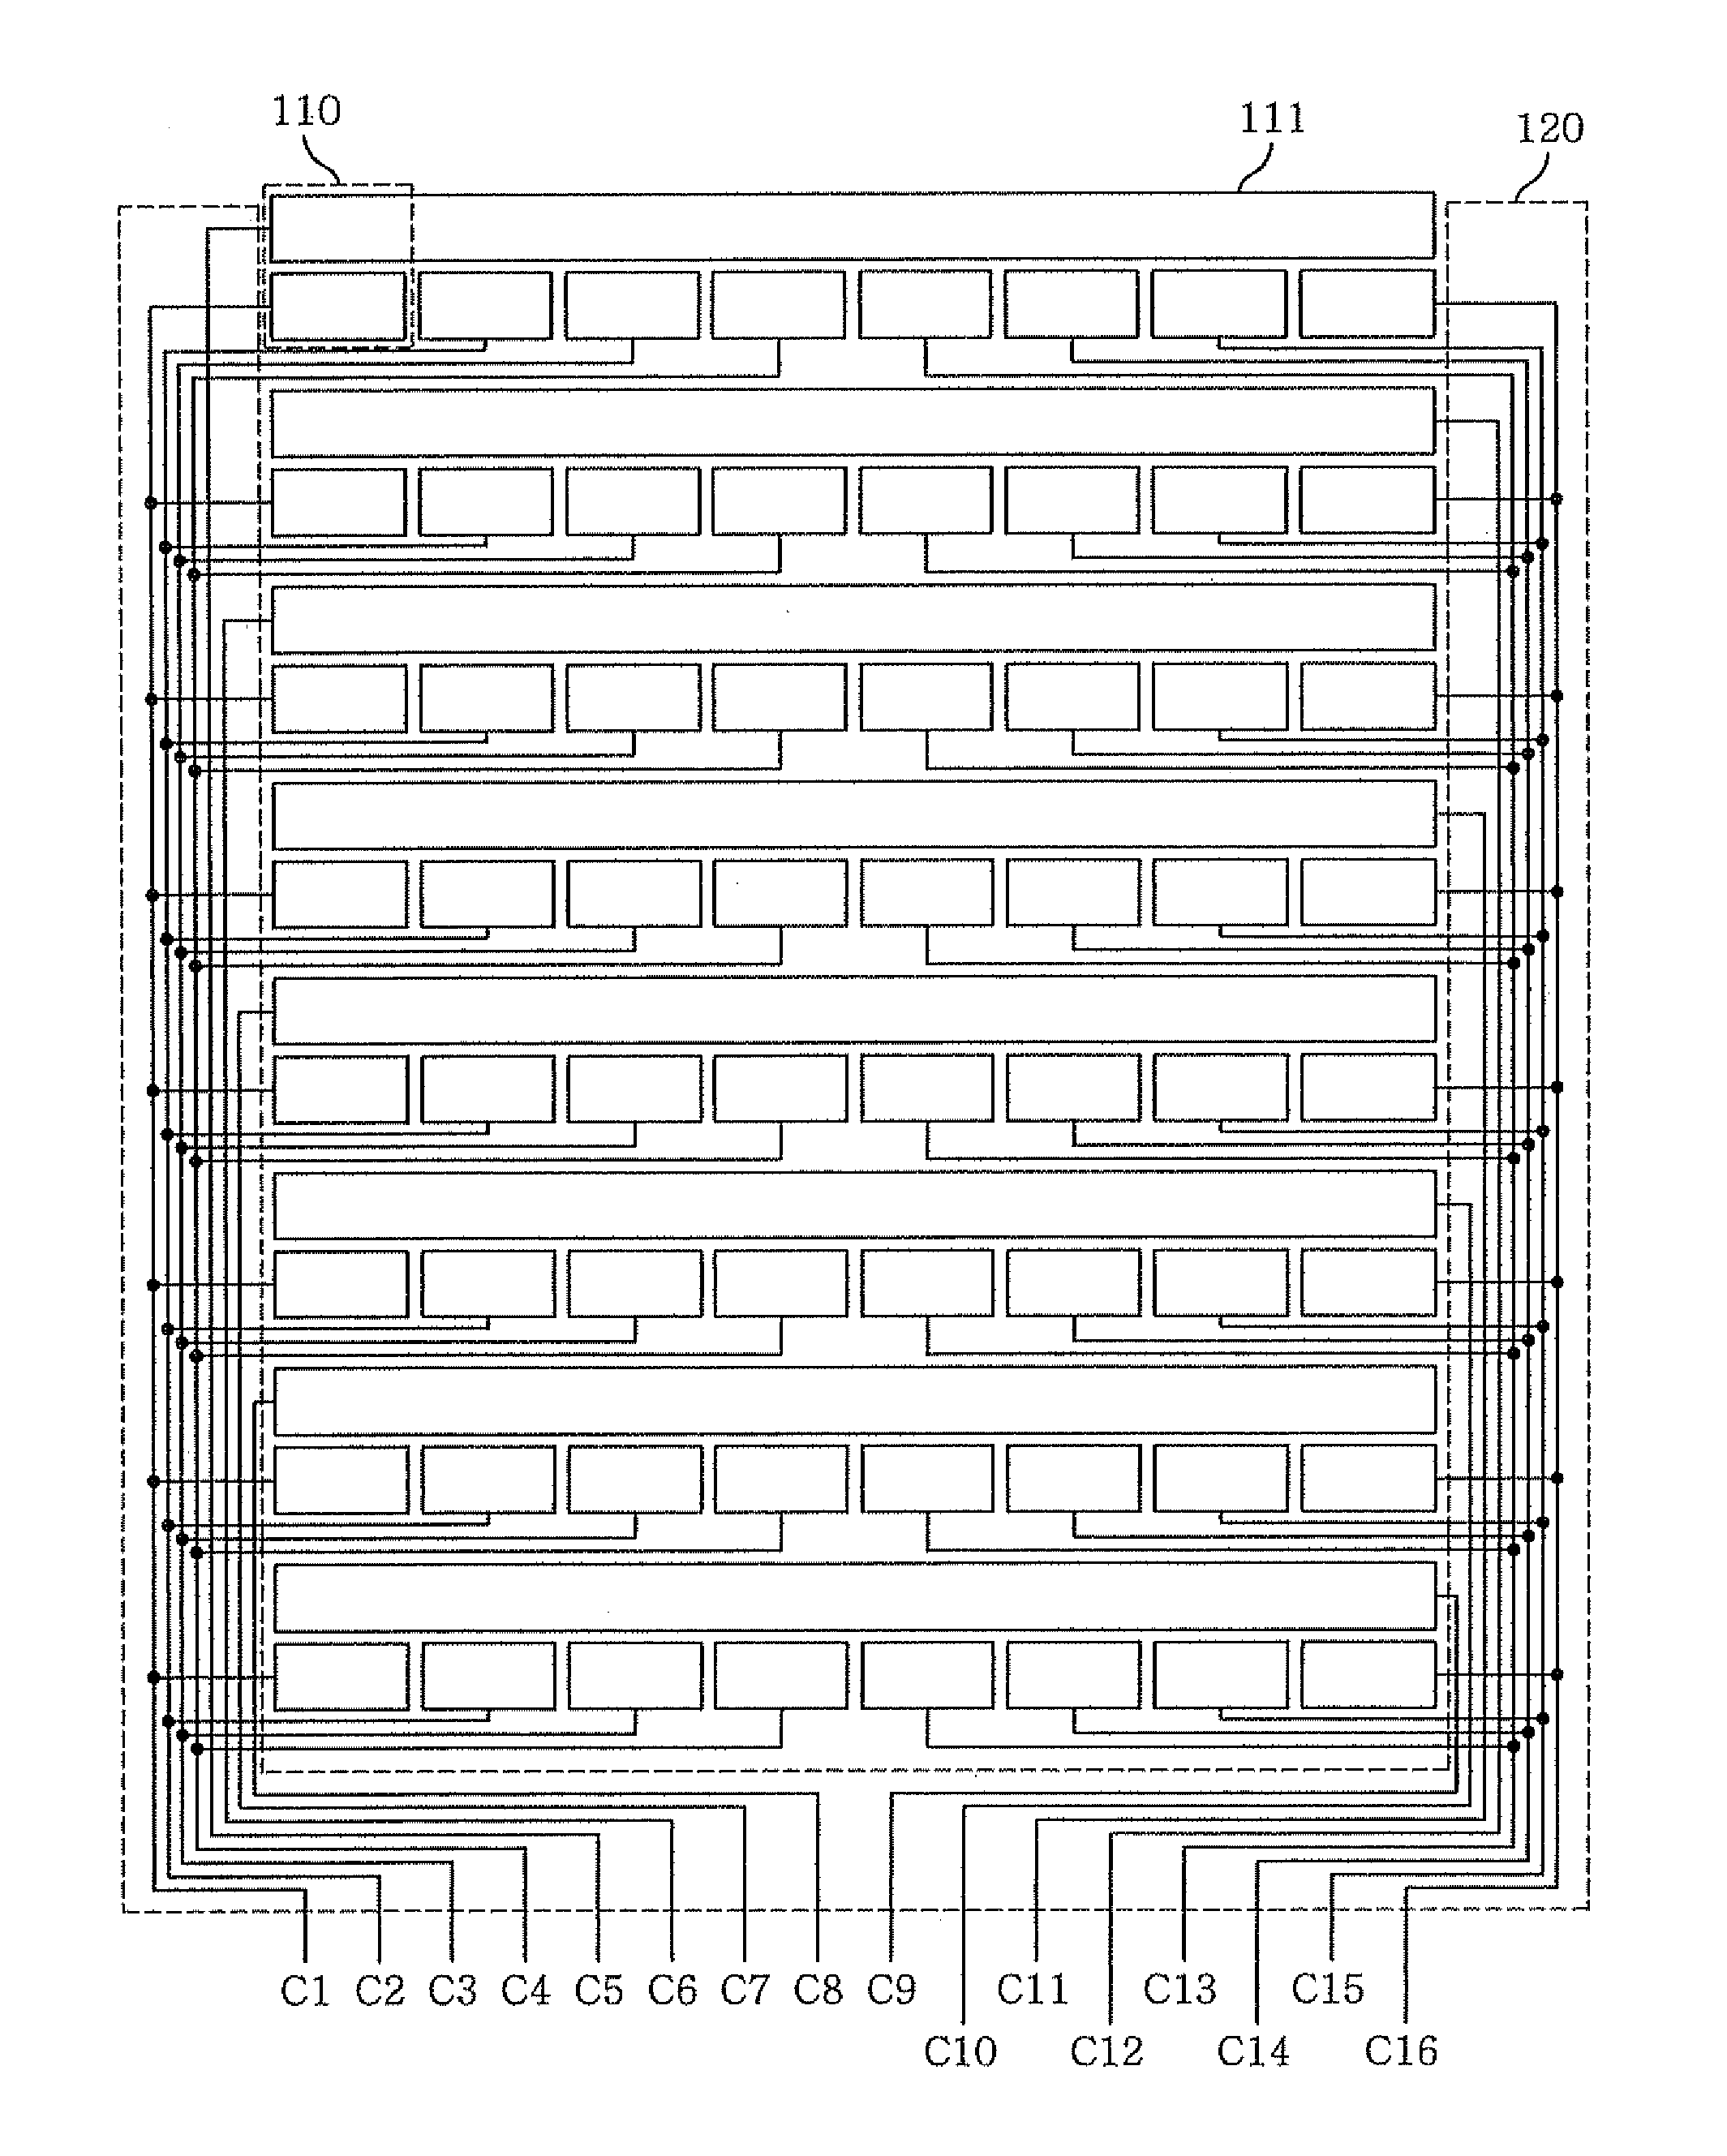 Touch location detecting panel having a simple layer structure